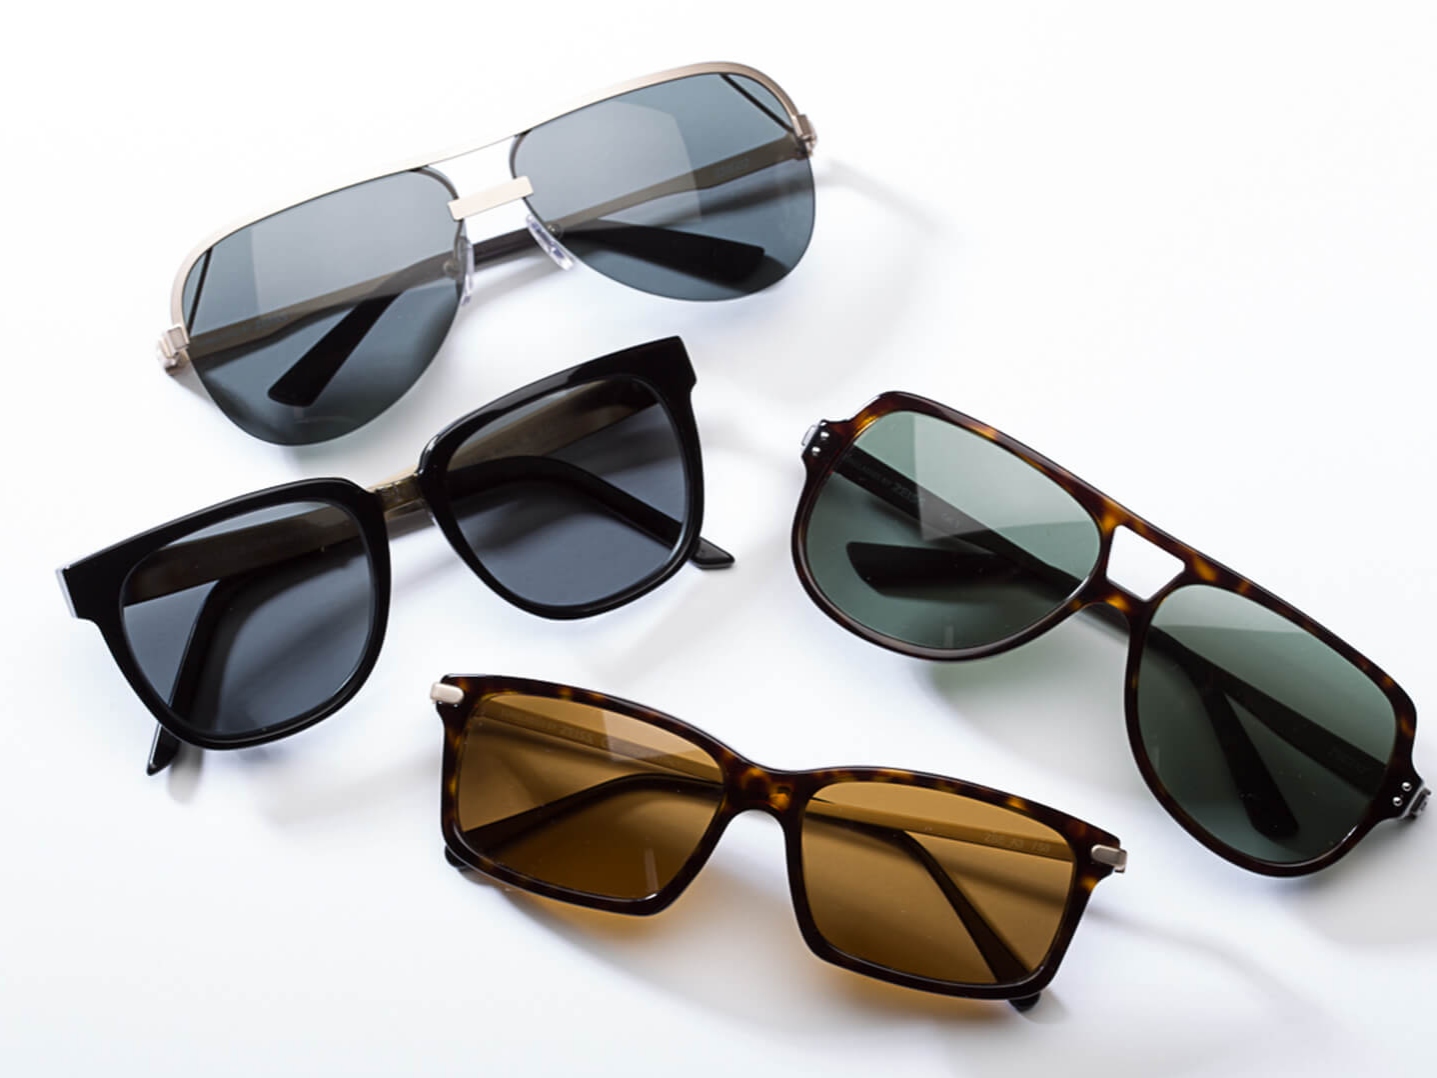 Polarised lenses are available in almost any colour you can think of, but speak to your eyecare practitioner about what you intend to use your tinted glasses for before choosing a shade.